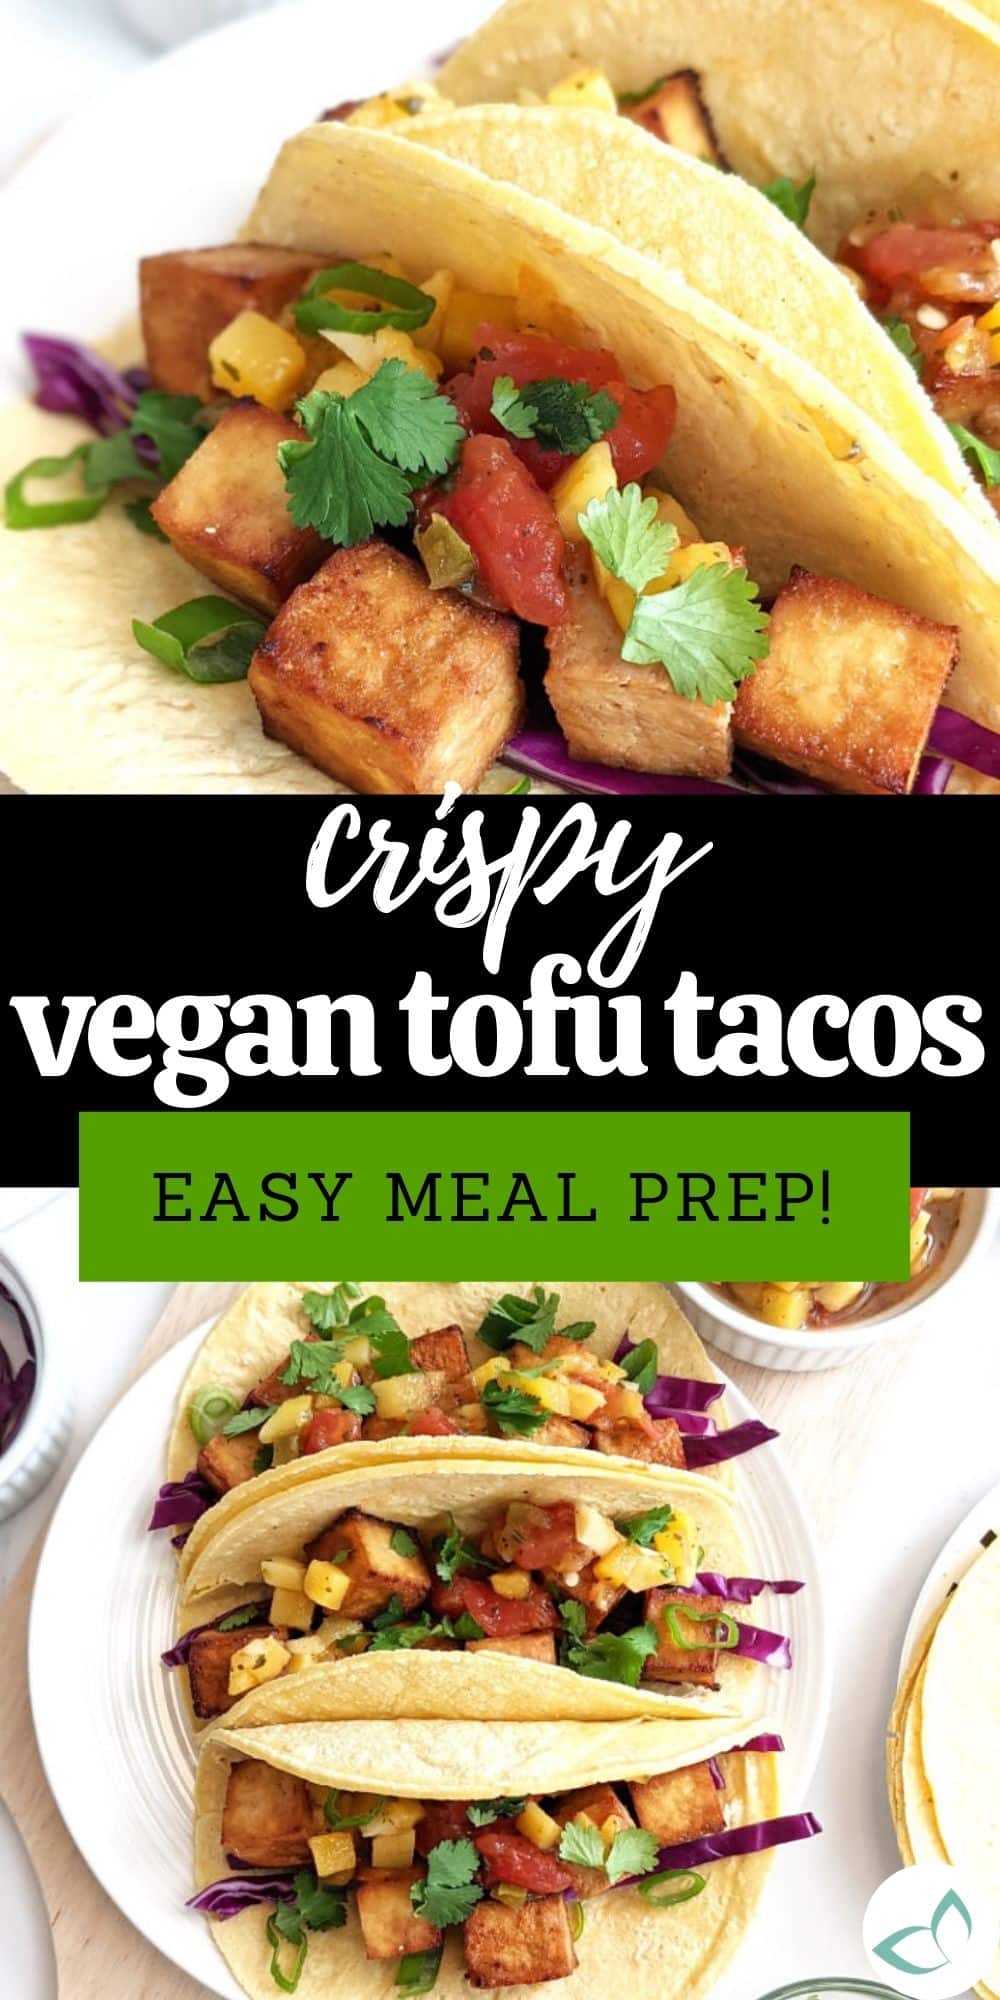 Up close of easy crispy vegan tofu tacos topped with salsa, cilantro, green onions and red cabbage. Text on image: crispy vegan tofu tacos easy meal prep